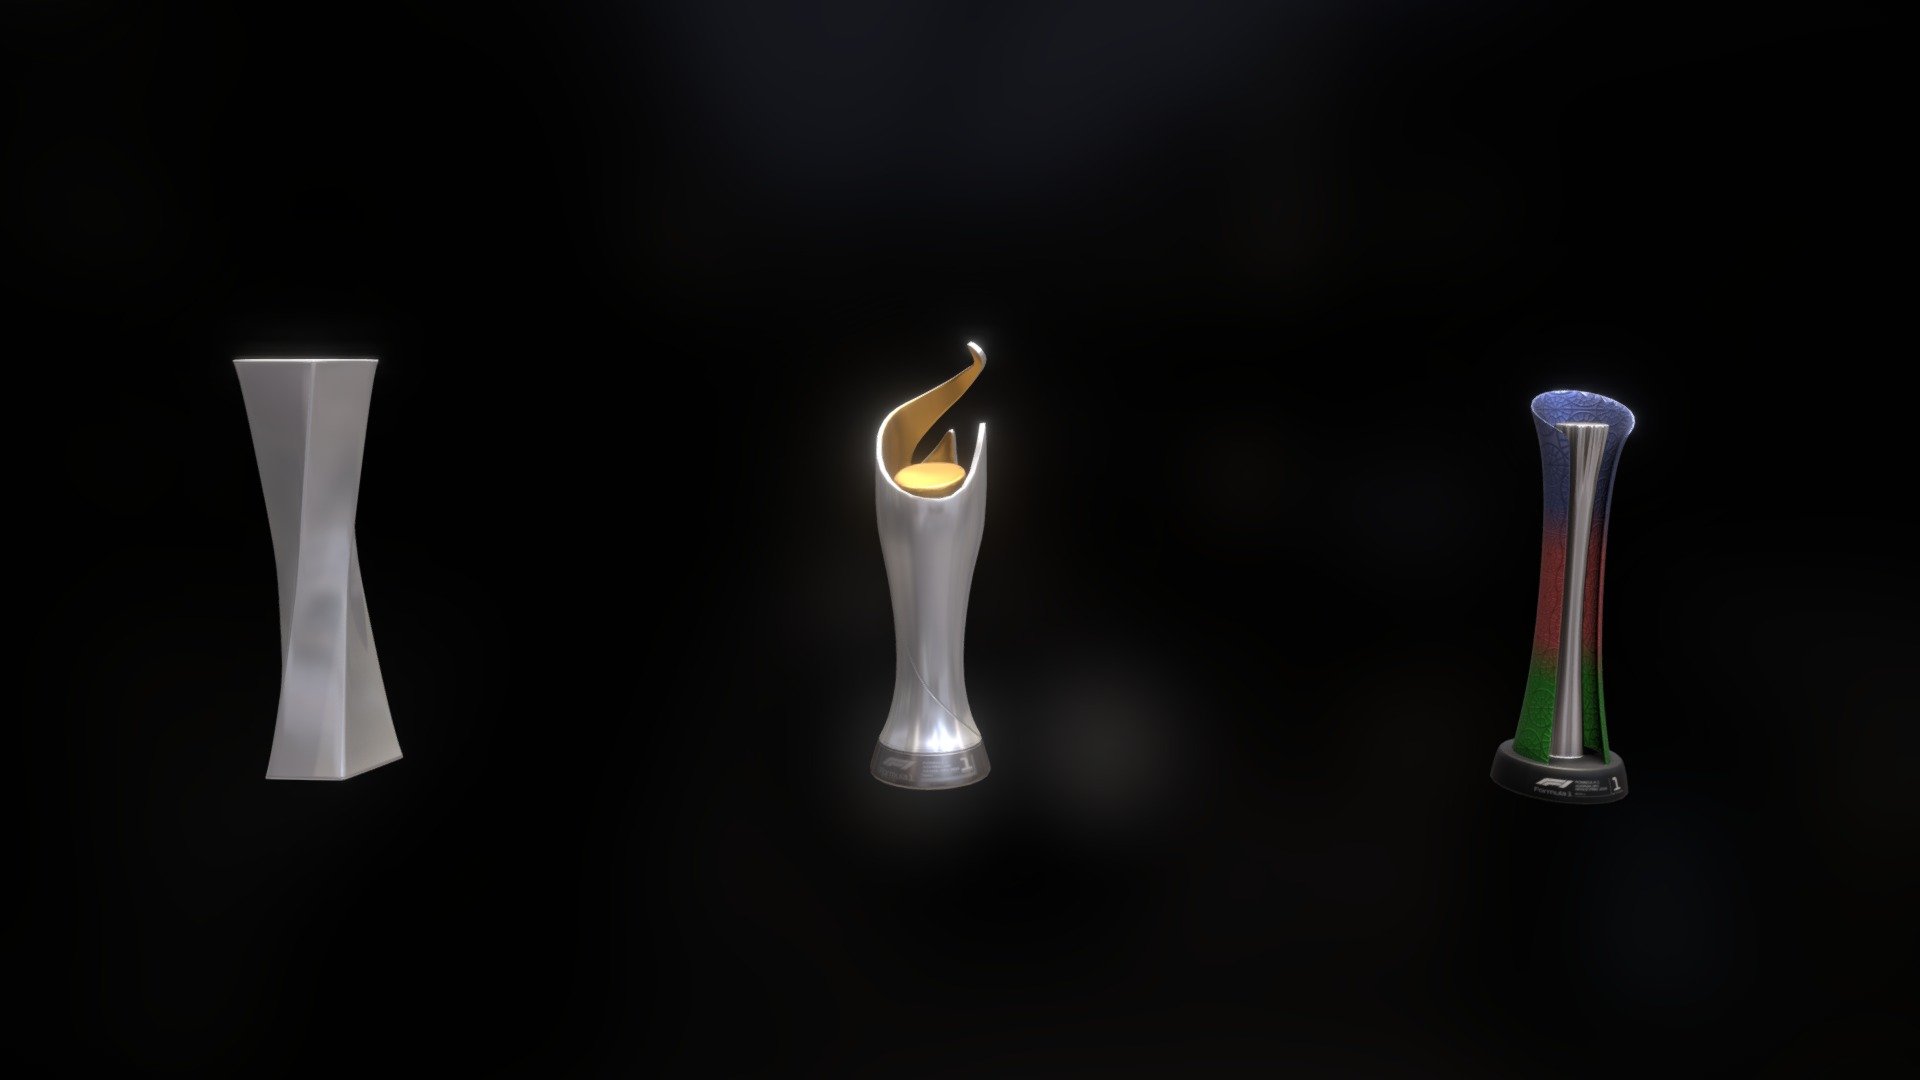 Trophies awarded to the winners of the 2018, 2021 and 2023 Azerbaijan Grand Prix in the Formula 1 Championship. The three models come in two versions, one with PBR textures in .blend .obj and .fbx files and another Watertight STL for 3D Printing.

PBR Textures 2048x2048:





Albedo




Roughness




Metallness




Normal




AO


 - F1 Trophy - Azerbaijan Fomula 1 GP - Buy Royalty Free 3D model by Machine Meza (@maurib98) 3d model